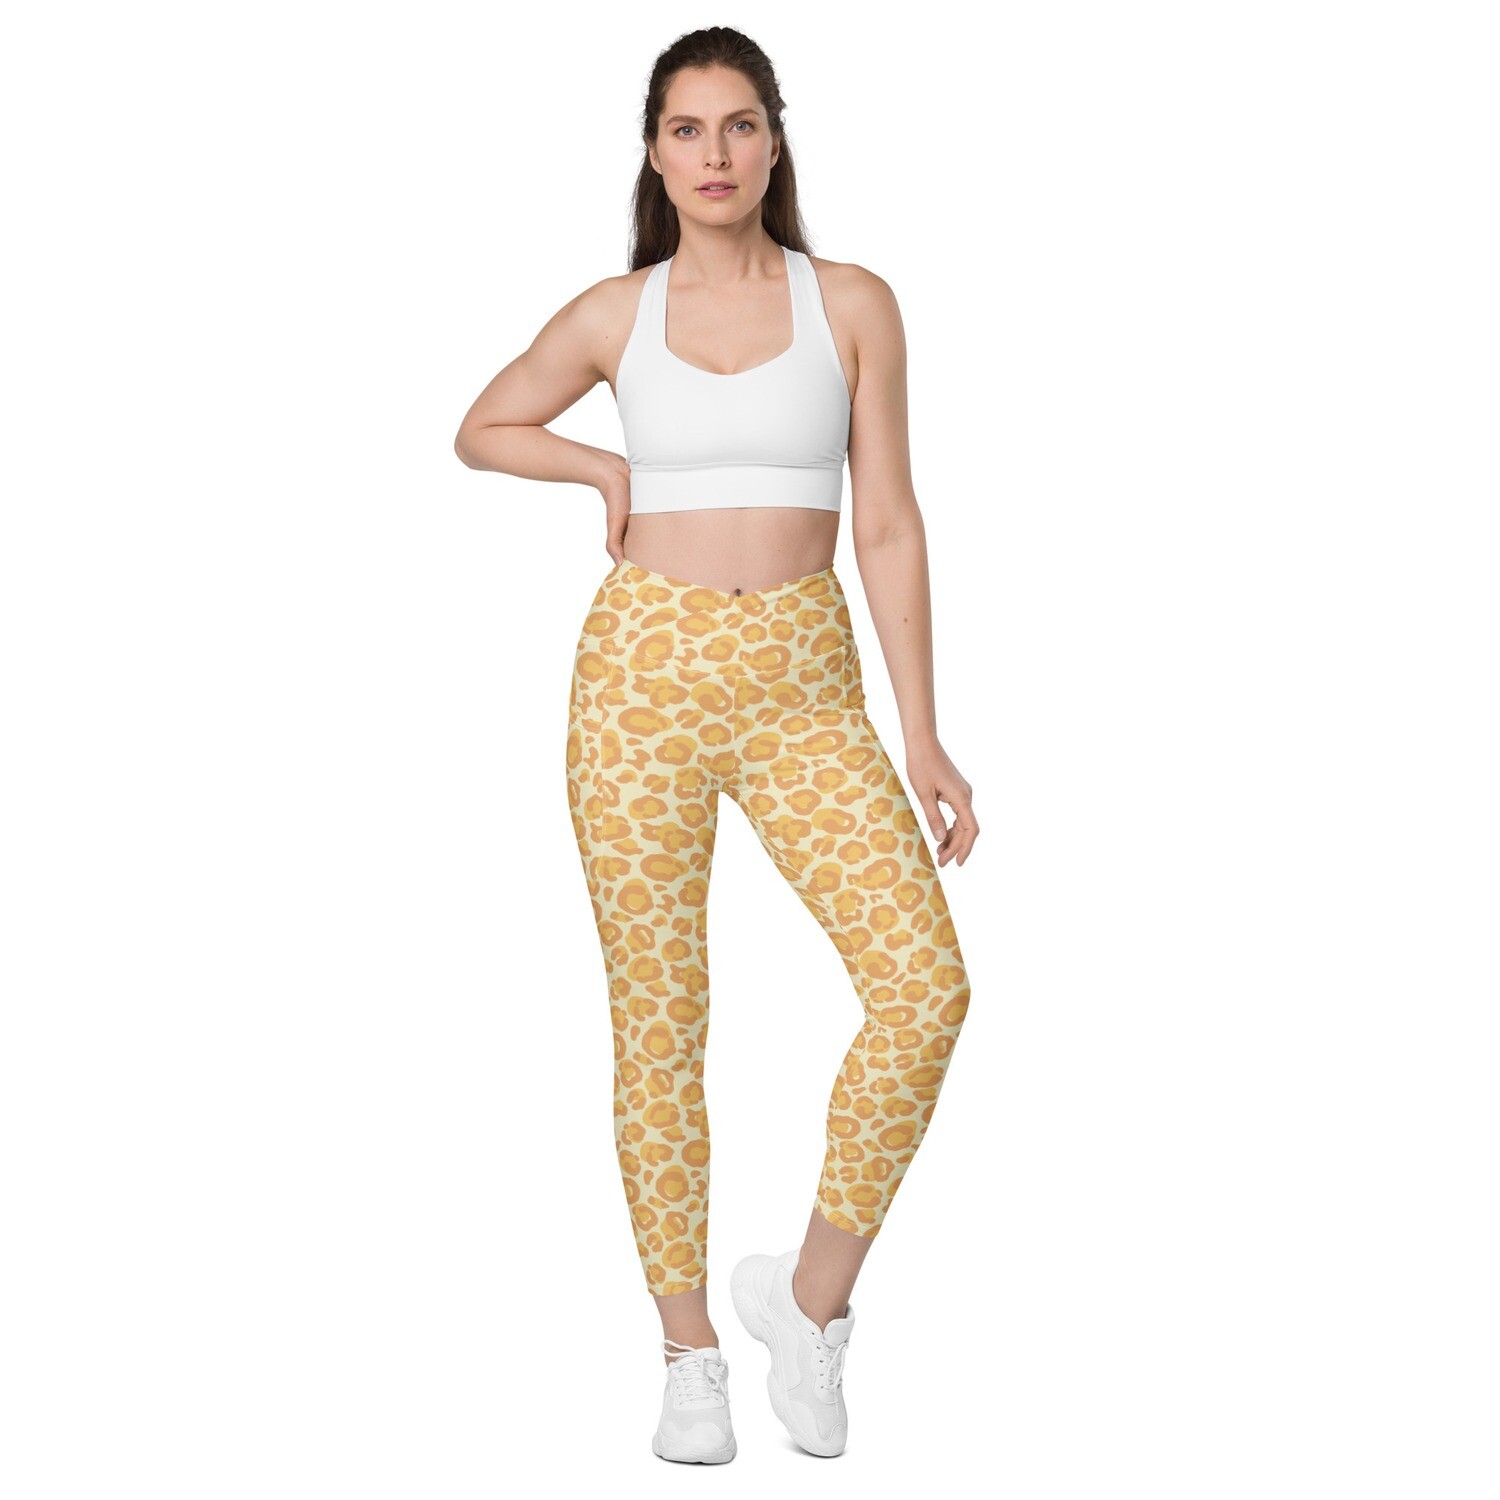  Yellow leopard Crossover leggings with pockets